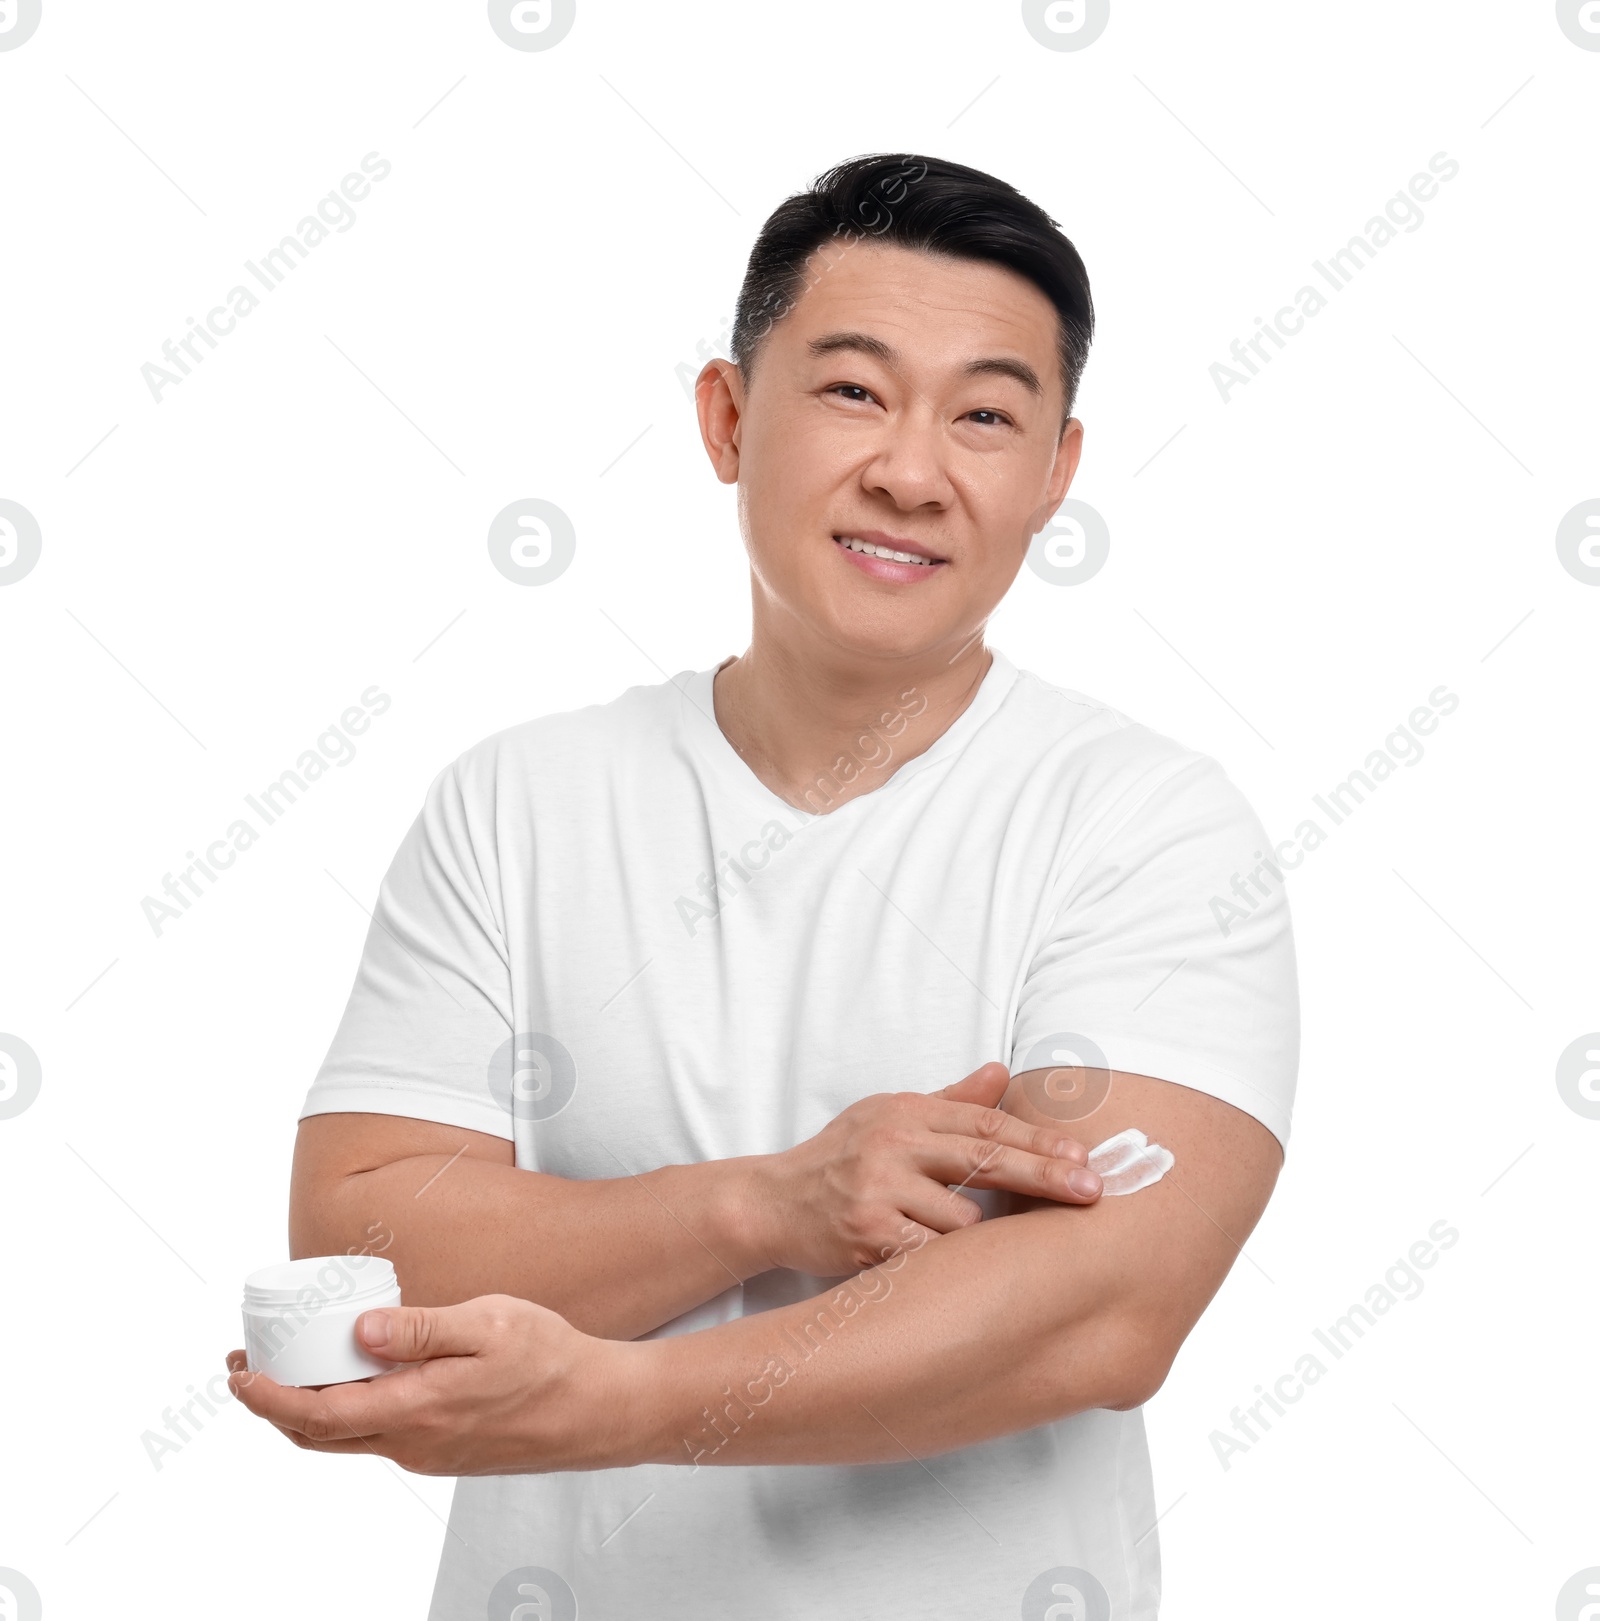 Photo of Handsome man applying body cream onto his arm on white background